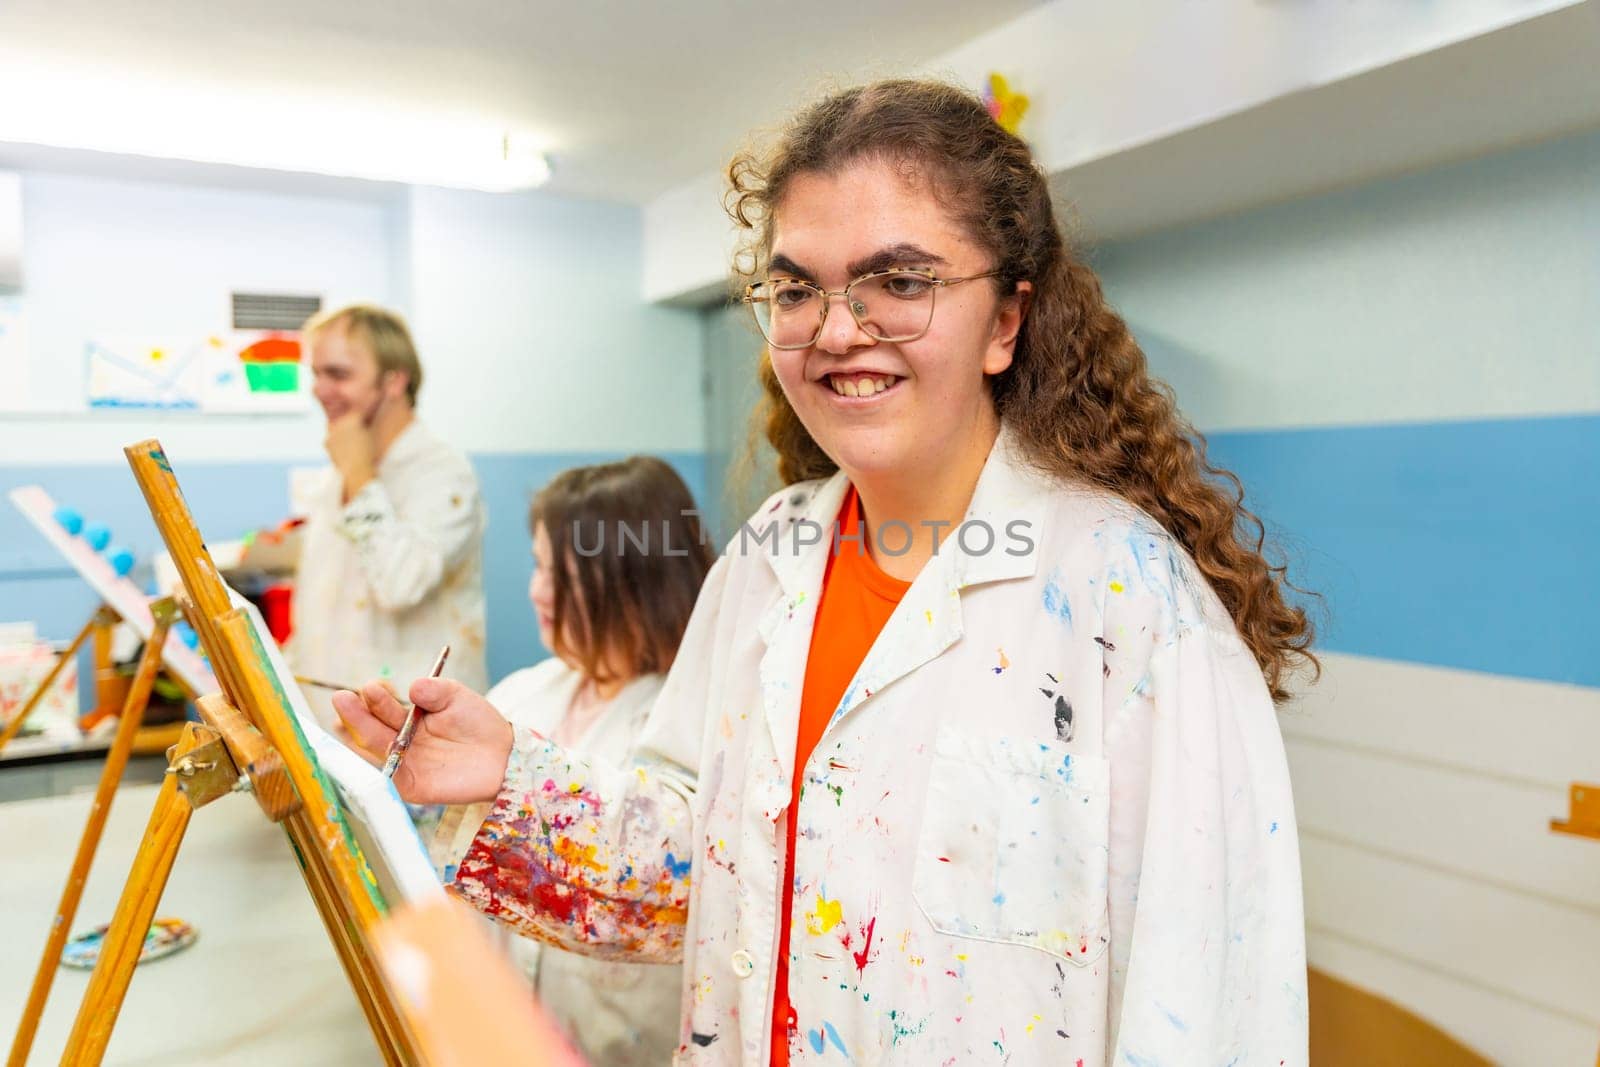 Disabled woman smiling during painting class indoors by Huizi